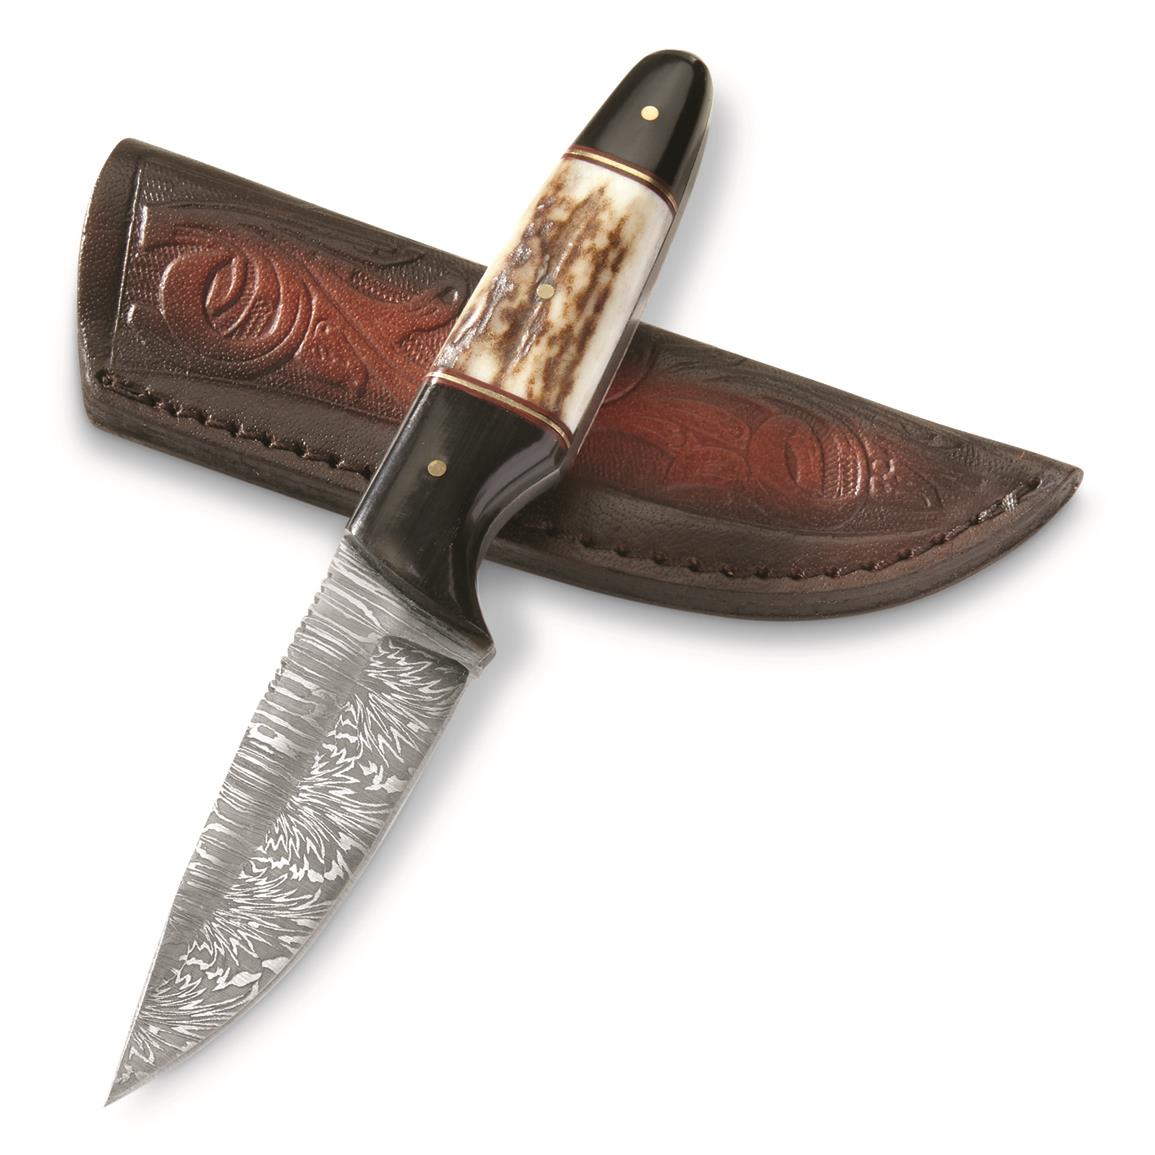 SZCO Horn and Stag Hunter Damascus Fixed Blade Knife